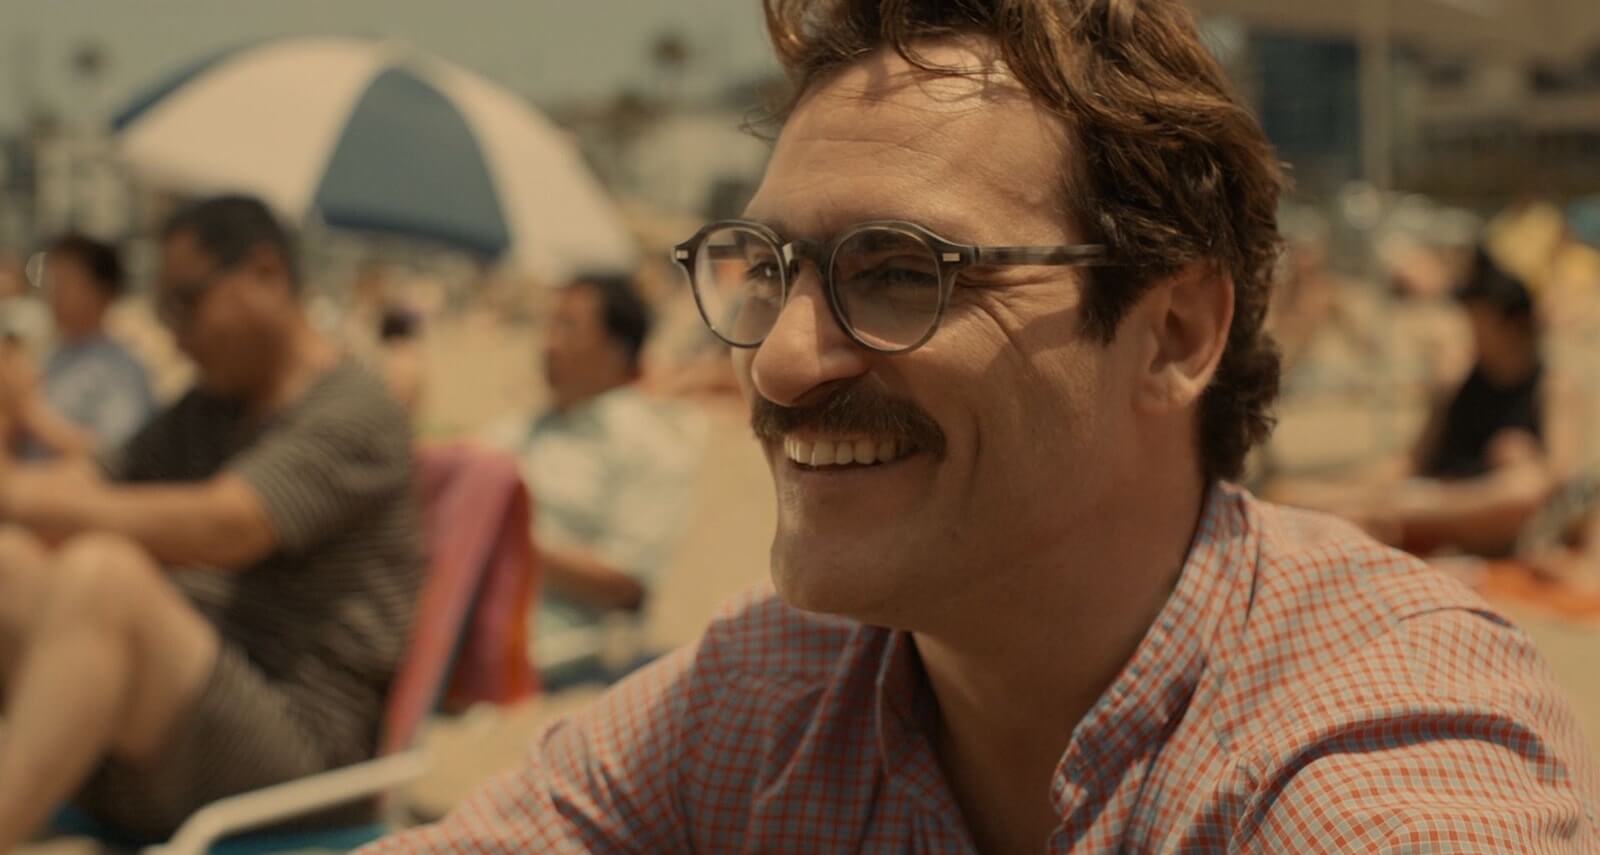 How Spike Jonze Shoots Movies About Loneliness - Close-Up